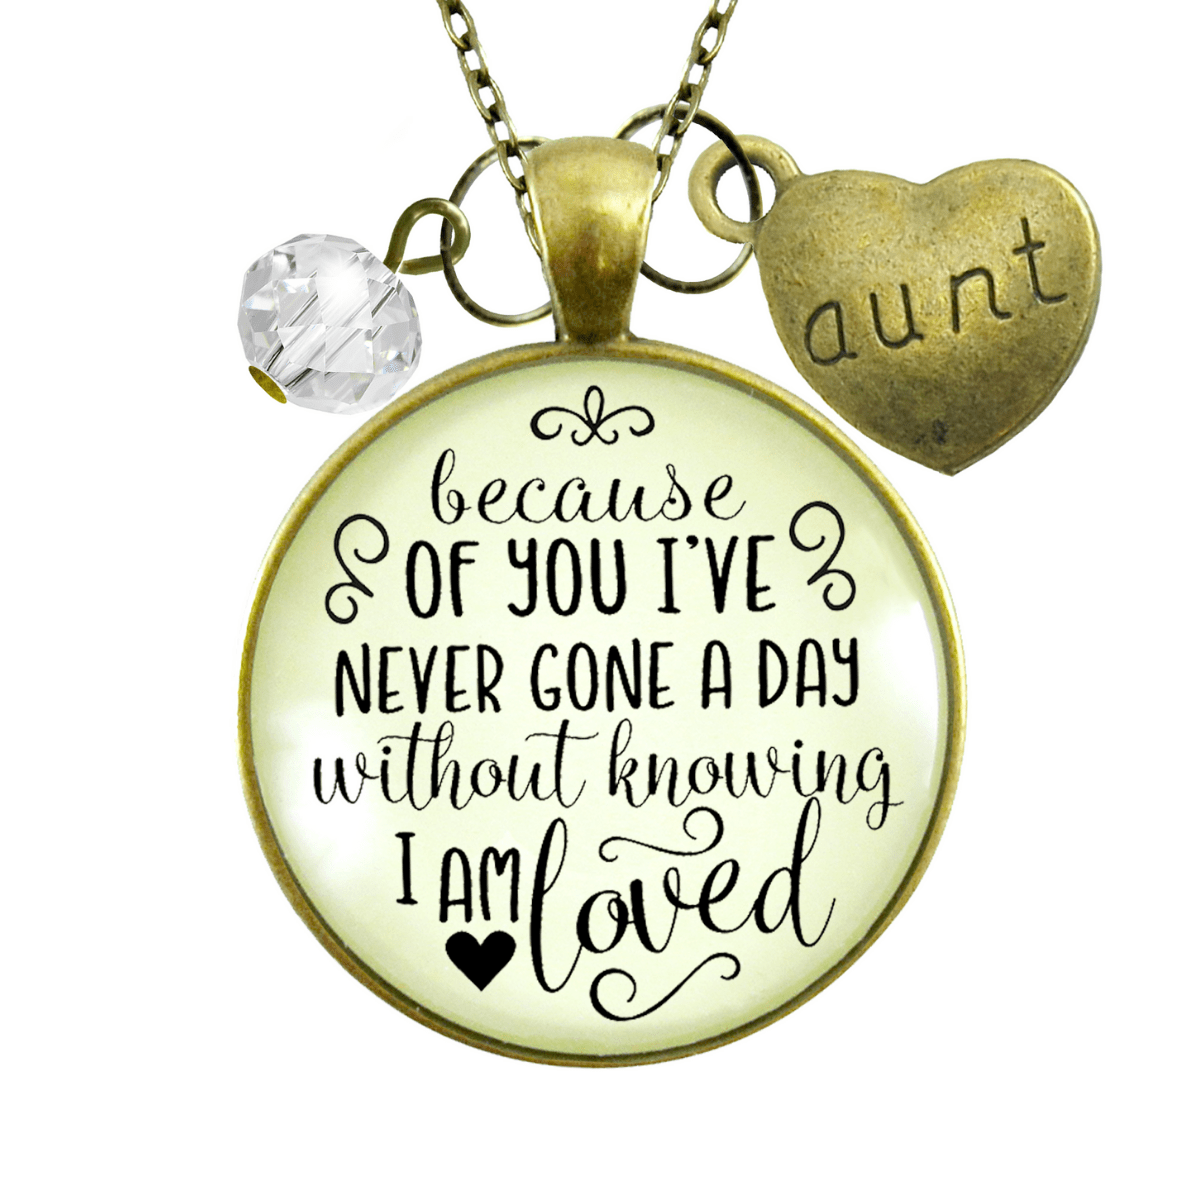 Gutsy Goodness Aunt Necklace Because of Your Love Meaningful Gift Family Jewelry - Gutsy Goodness Handmade Jewelry;Aunt Necklace Because Of Your Love Meaningful Gift Family Jewelry - Gutsy Goodness Handmade Jewelry Gifts